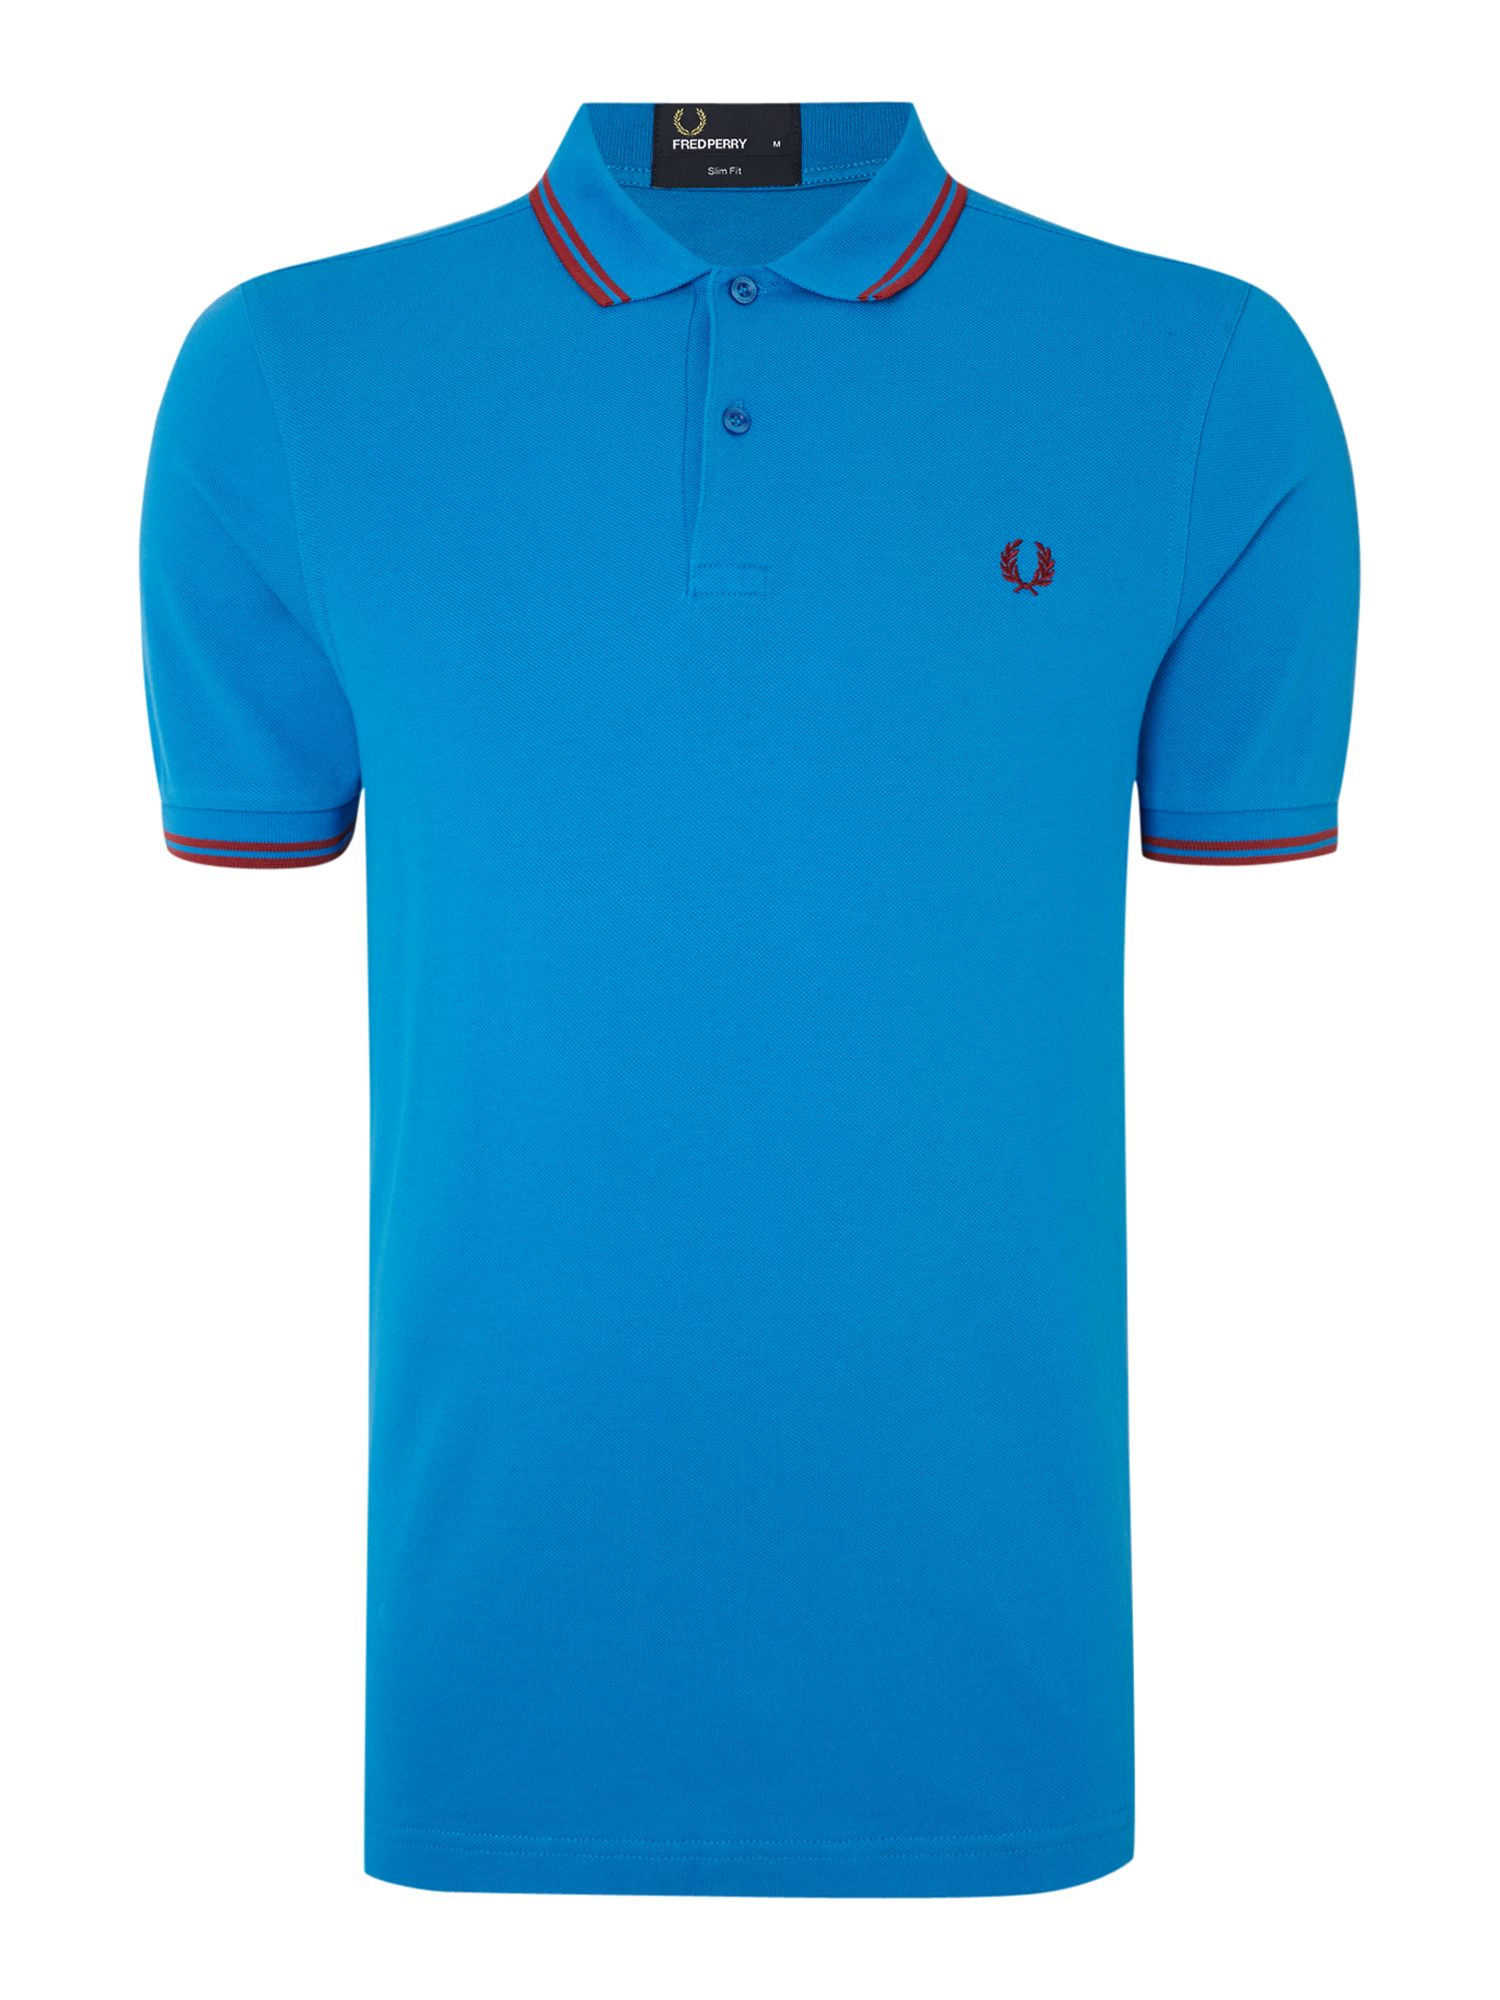 Fred Perry Plain Slim Fit Polo Shirt in Blue for Men (Bright Blue) | Lyst